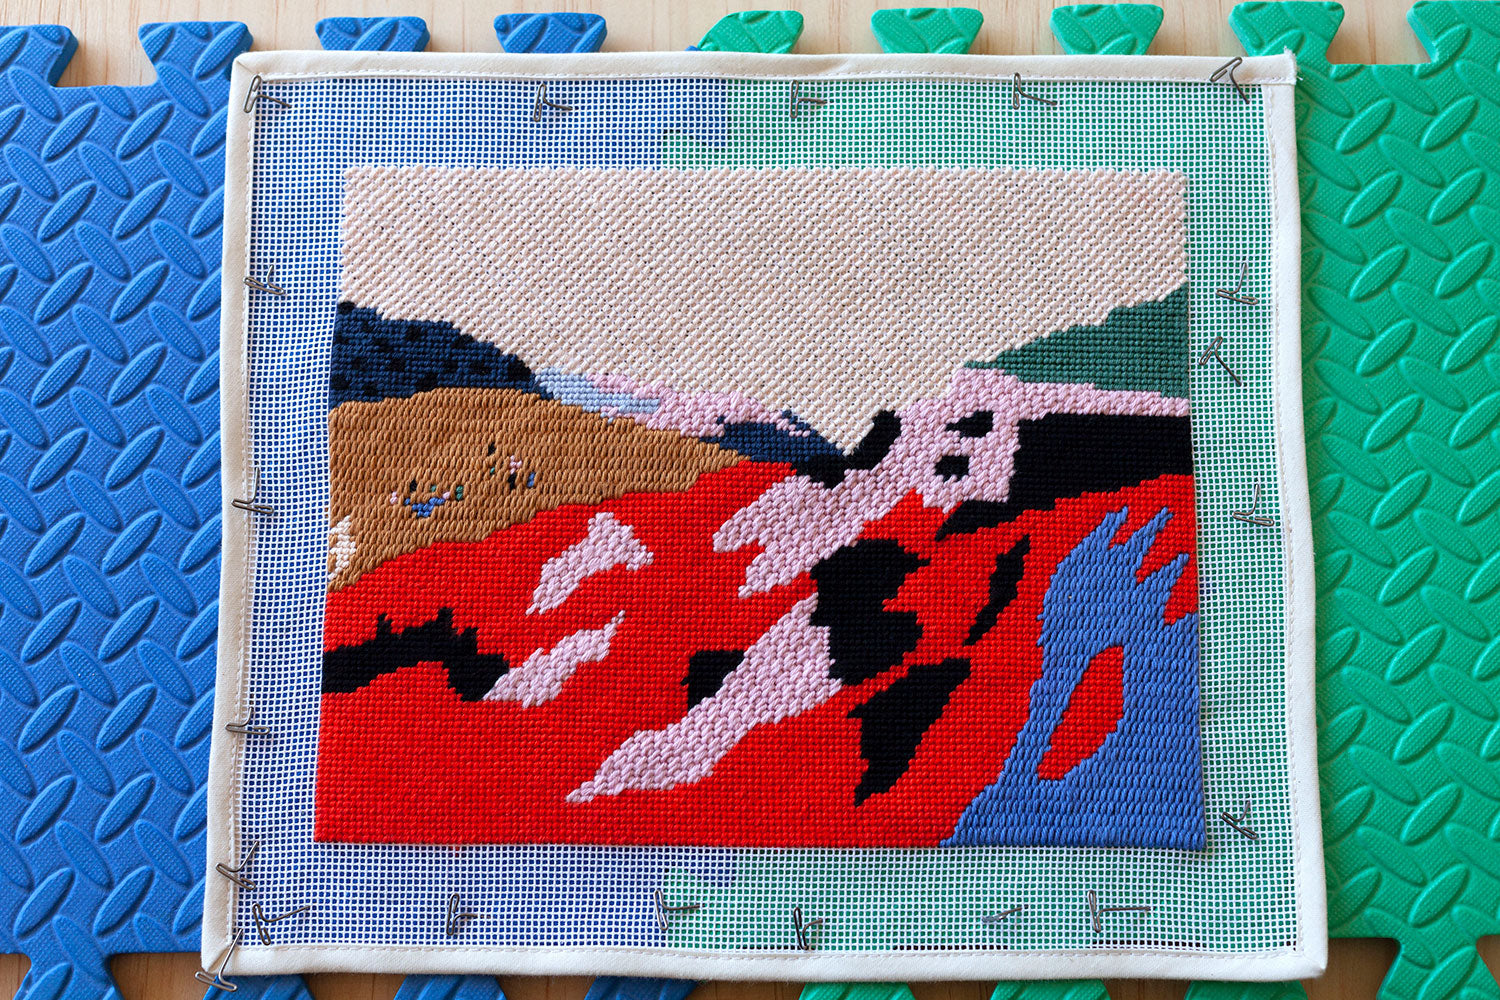 Using Stretcher Bars: Why Stretch a Needlepoint Canvas?